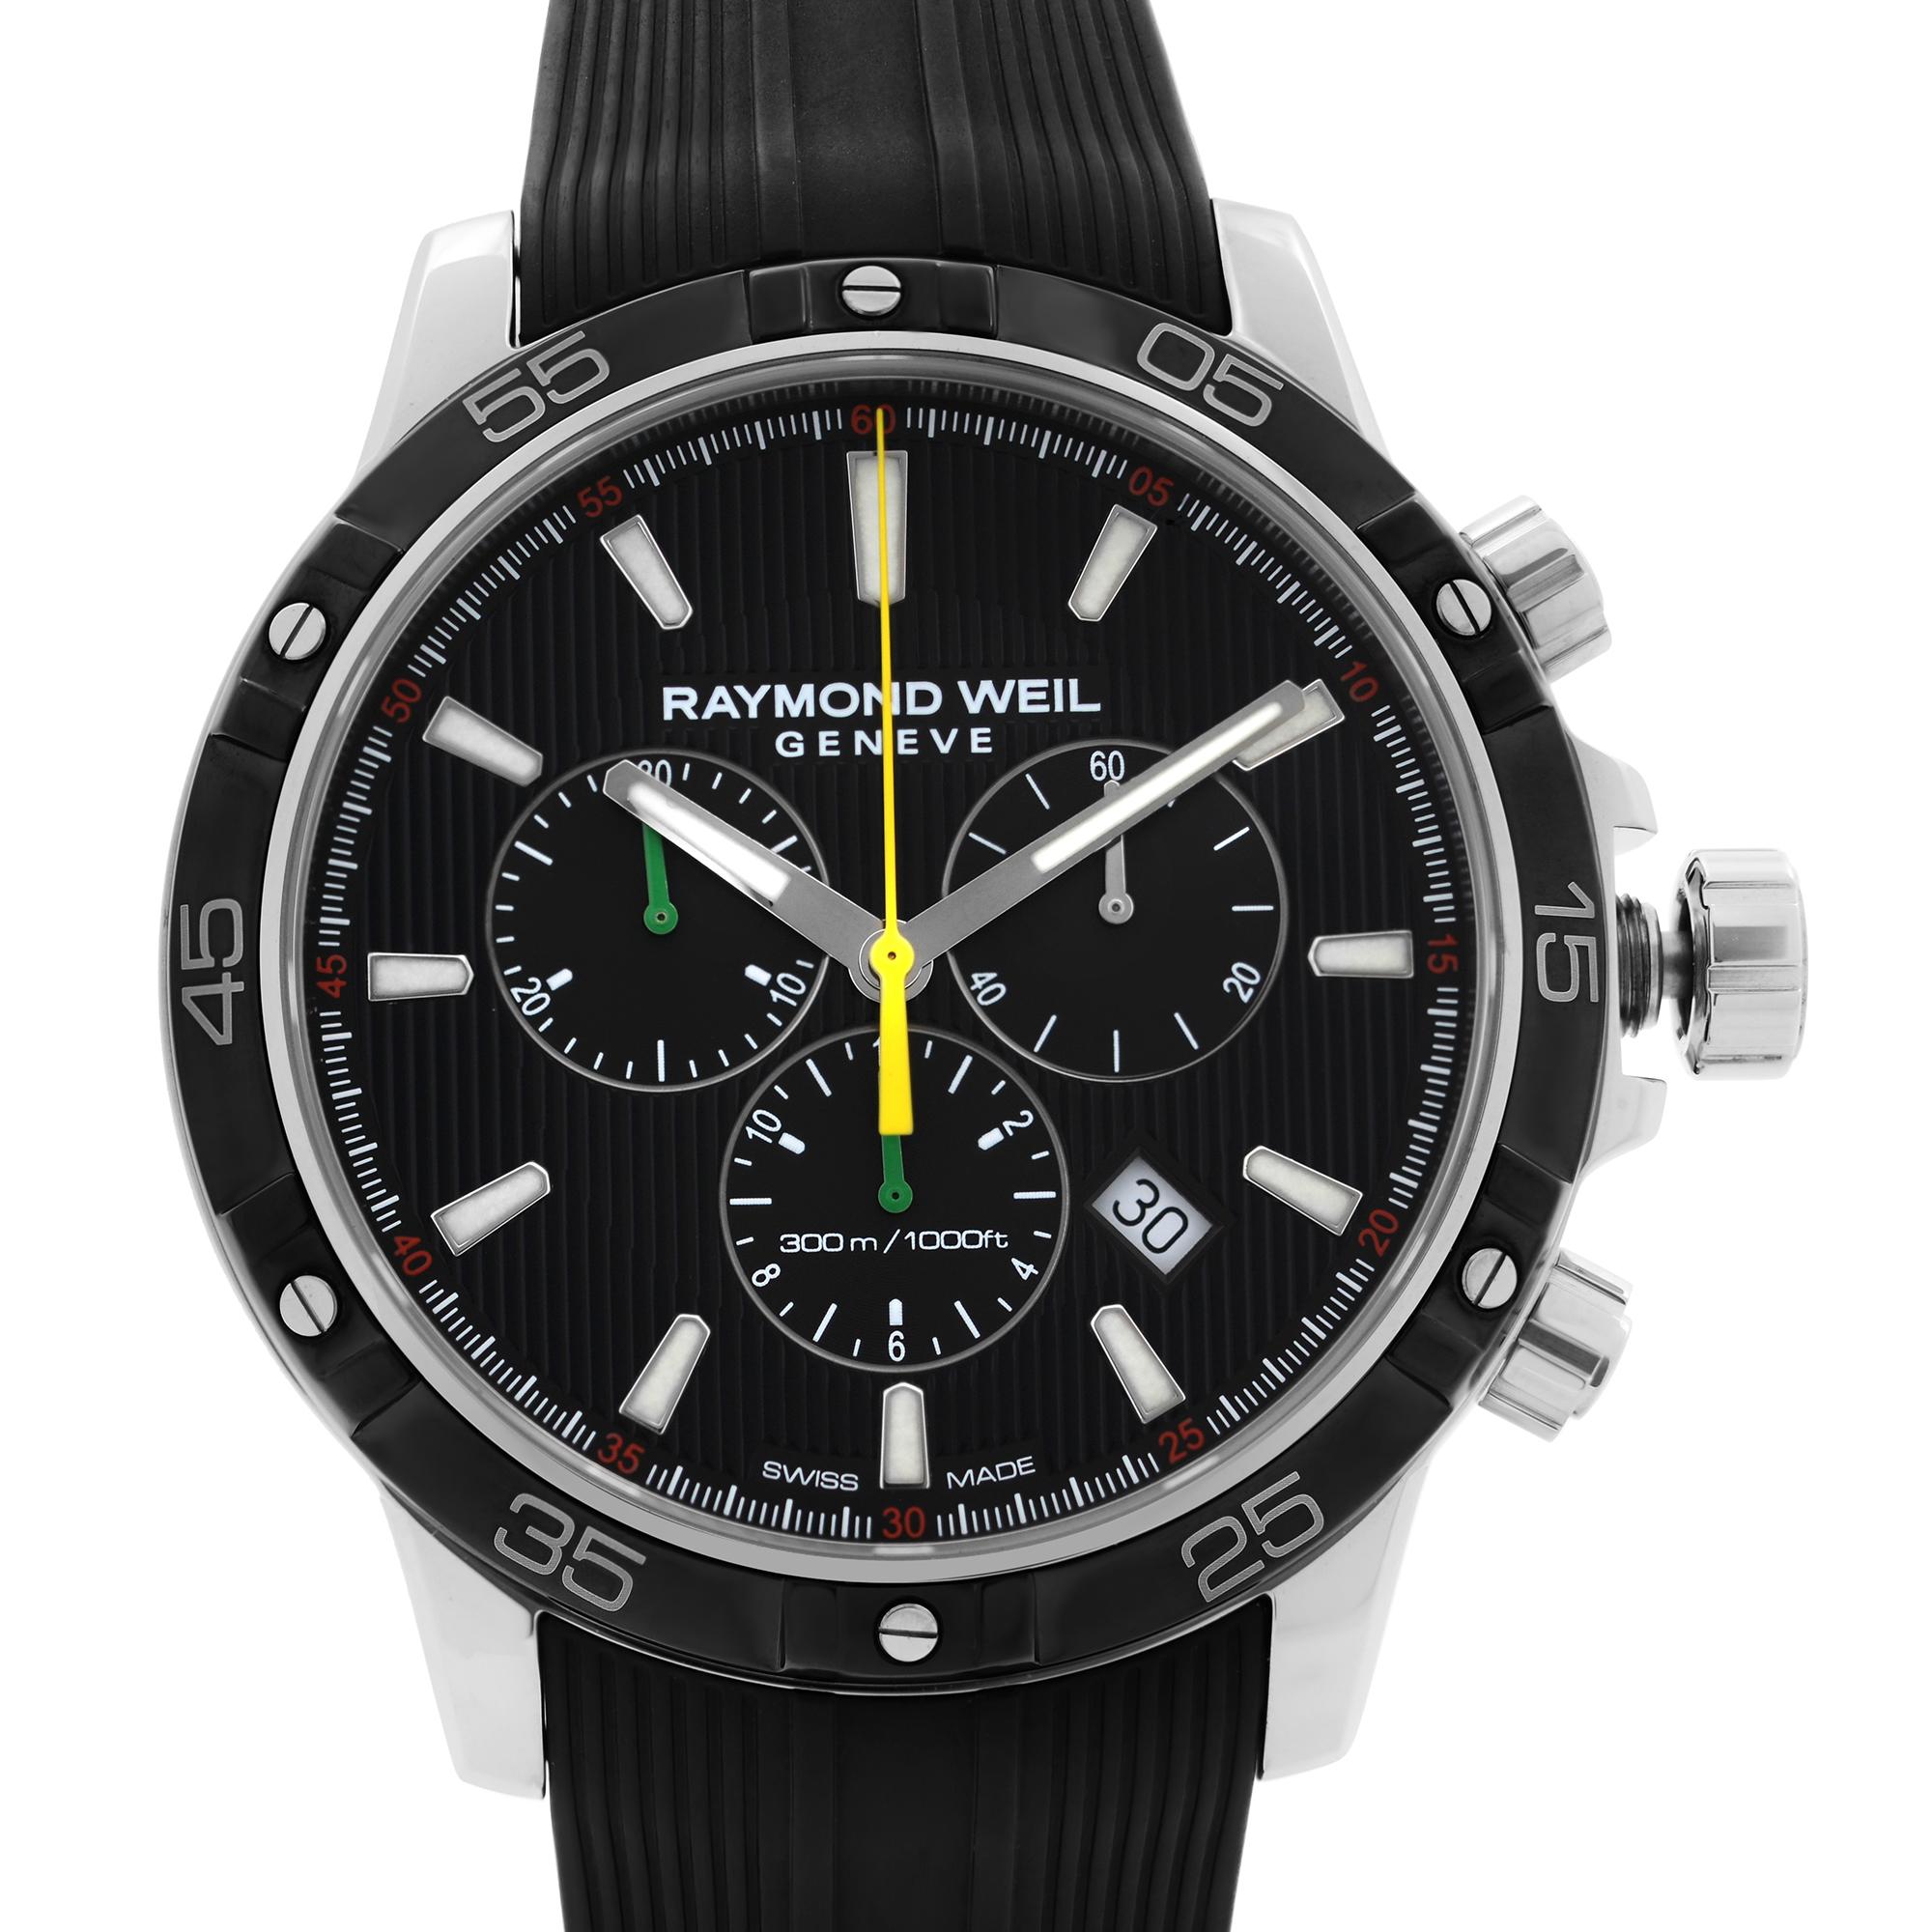 Unworn Raymond Weil Tango Bob Marley Limited Edition Steel Black Dial Men's Watch 8560-SR1-BMY17. This Beautiful Timepiece Features: Stainless Steel Case with a Black Rubber Strap, Fixed Stainless Steel Bezel with a Black PVD Top Ring, Black Dial